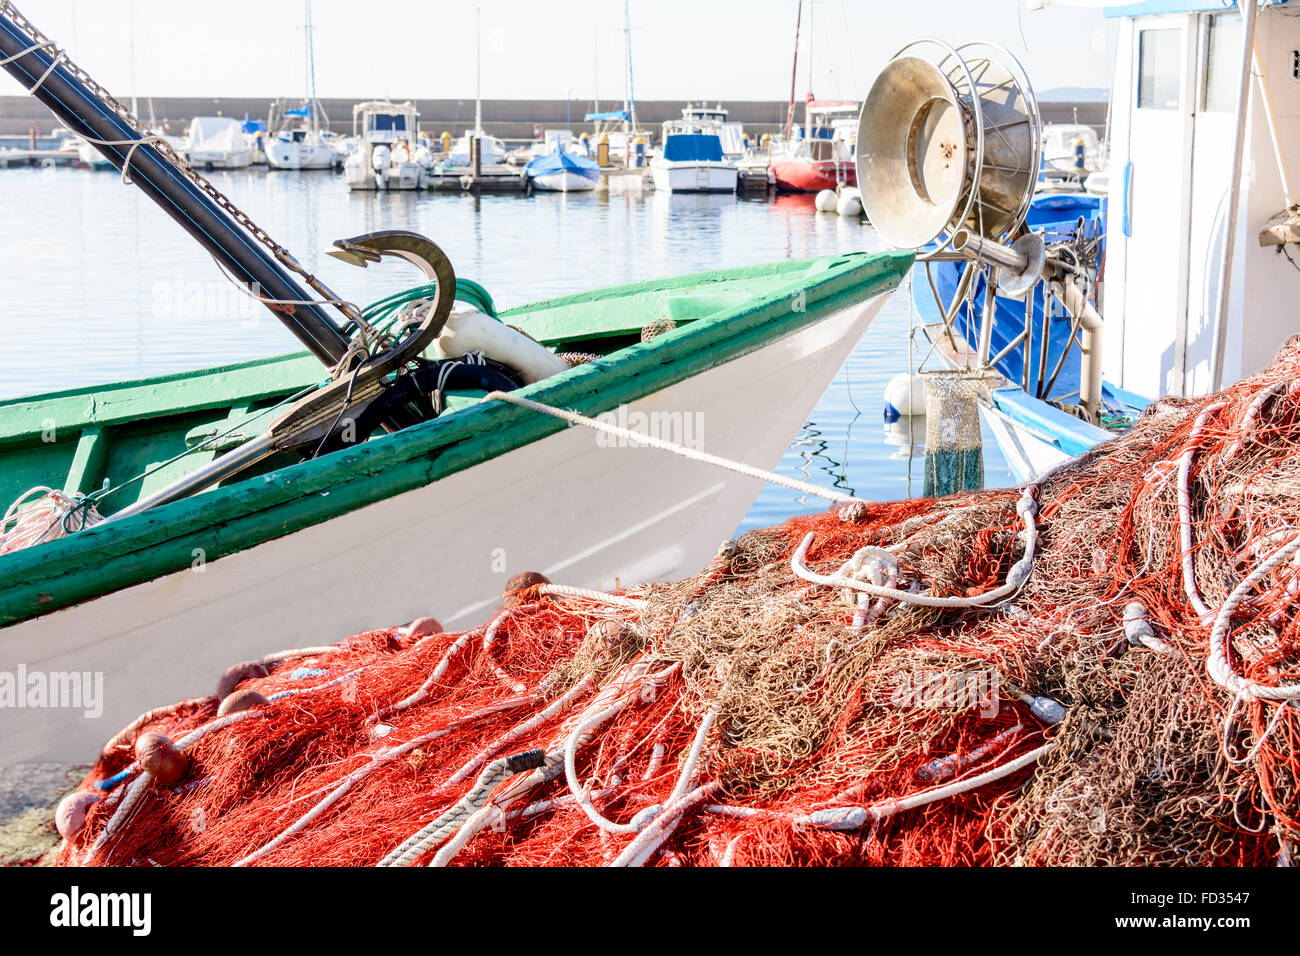 https://c8.alamy.com/comp/FD3547/red-fishing-on-pier-and-on-the-boat-fishing-net-and-boats-waiting-FD3547.jpg